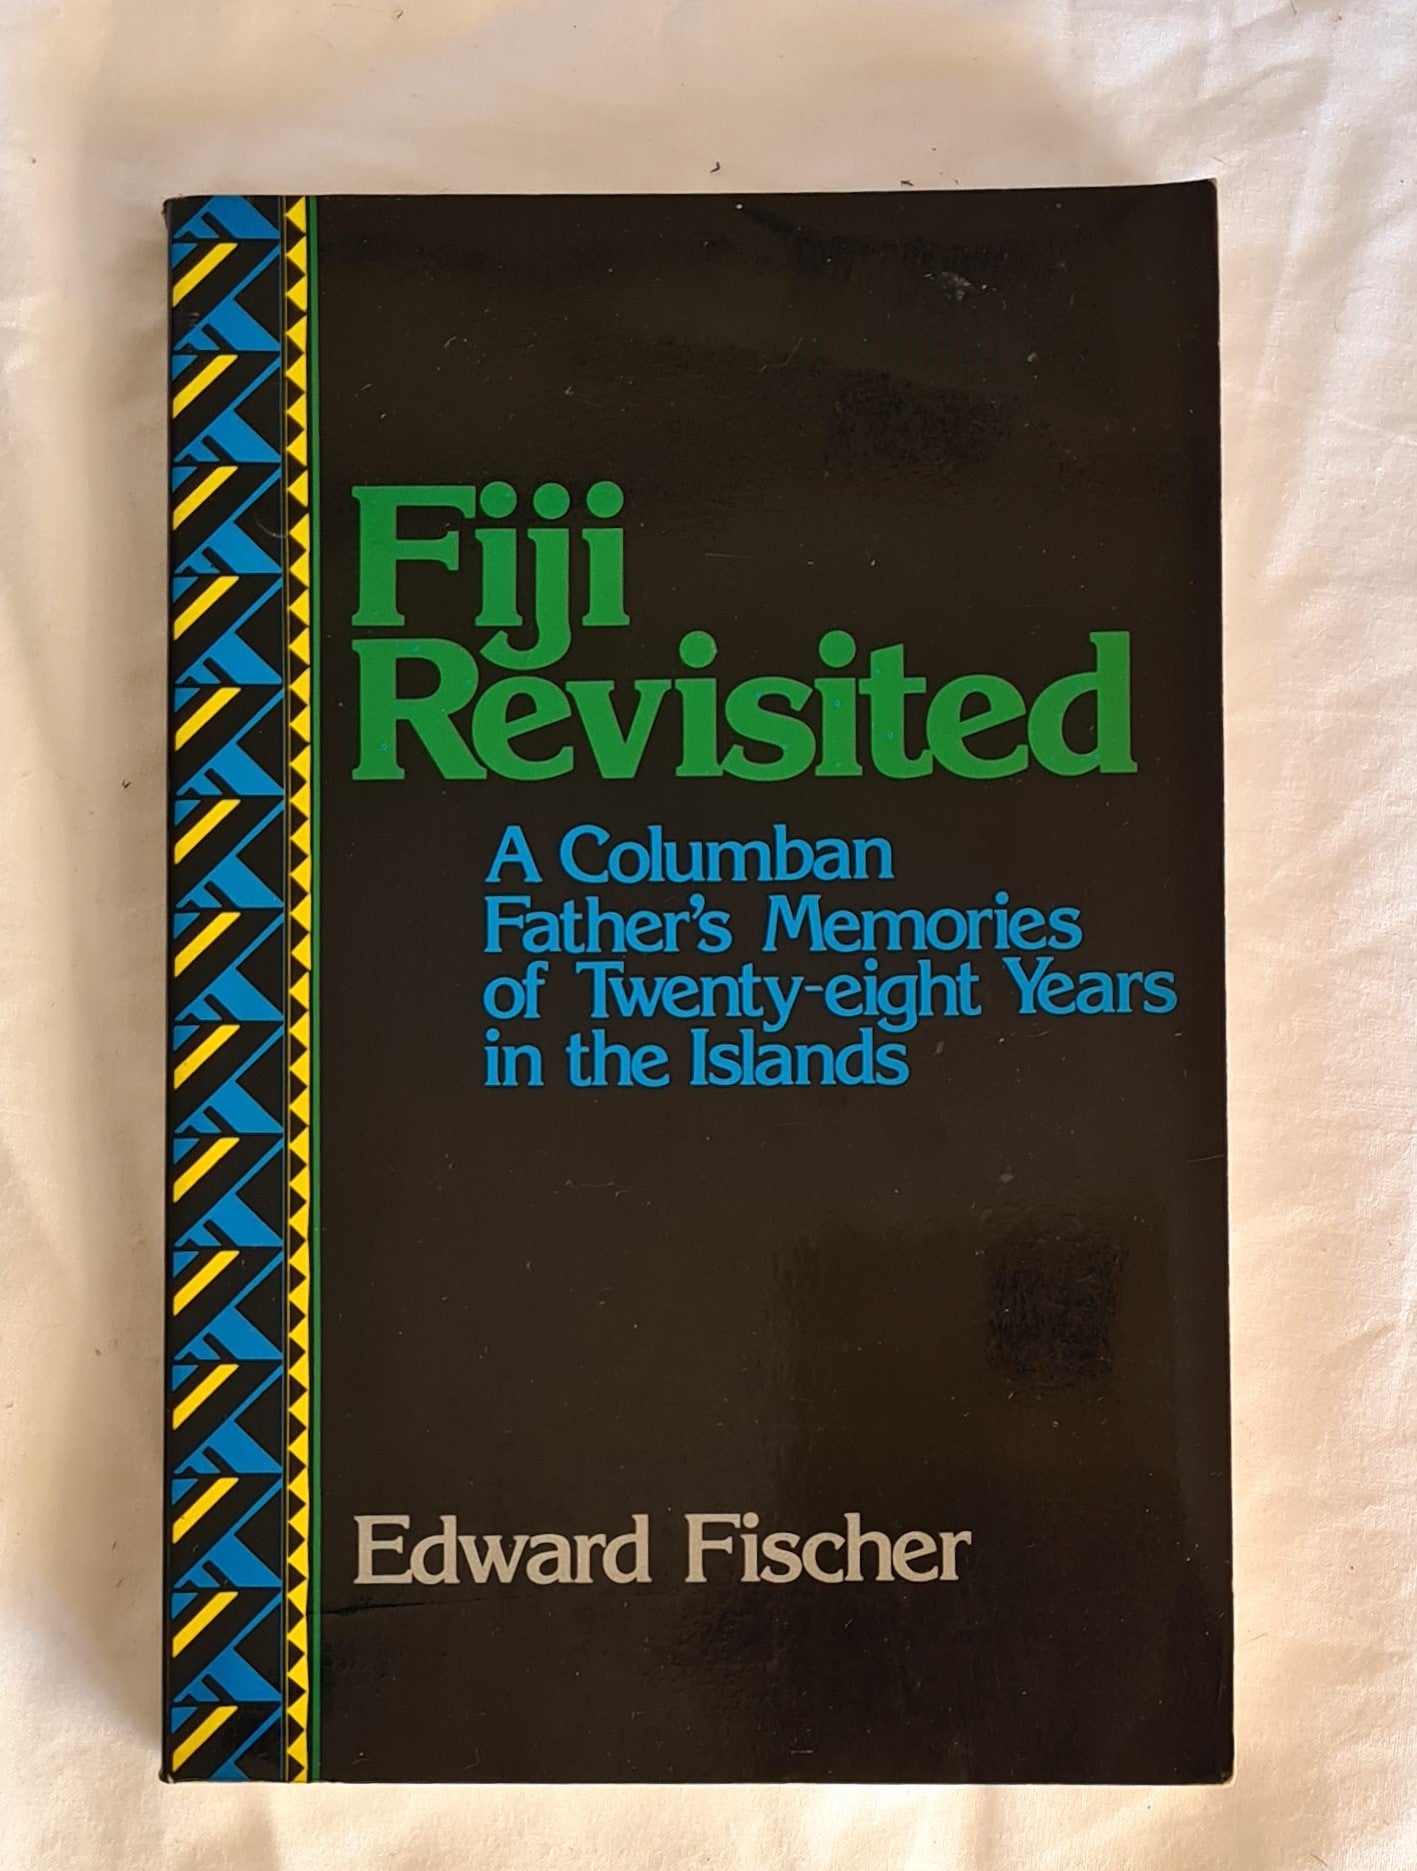 Fiji Revisited  A Columban Father’s Memories of Twenty-eight Years in the Islands  by Edward Fischer